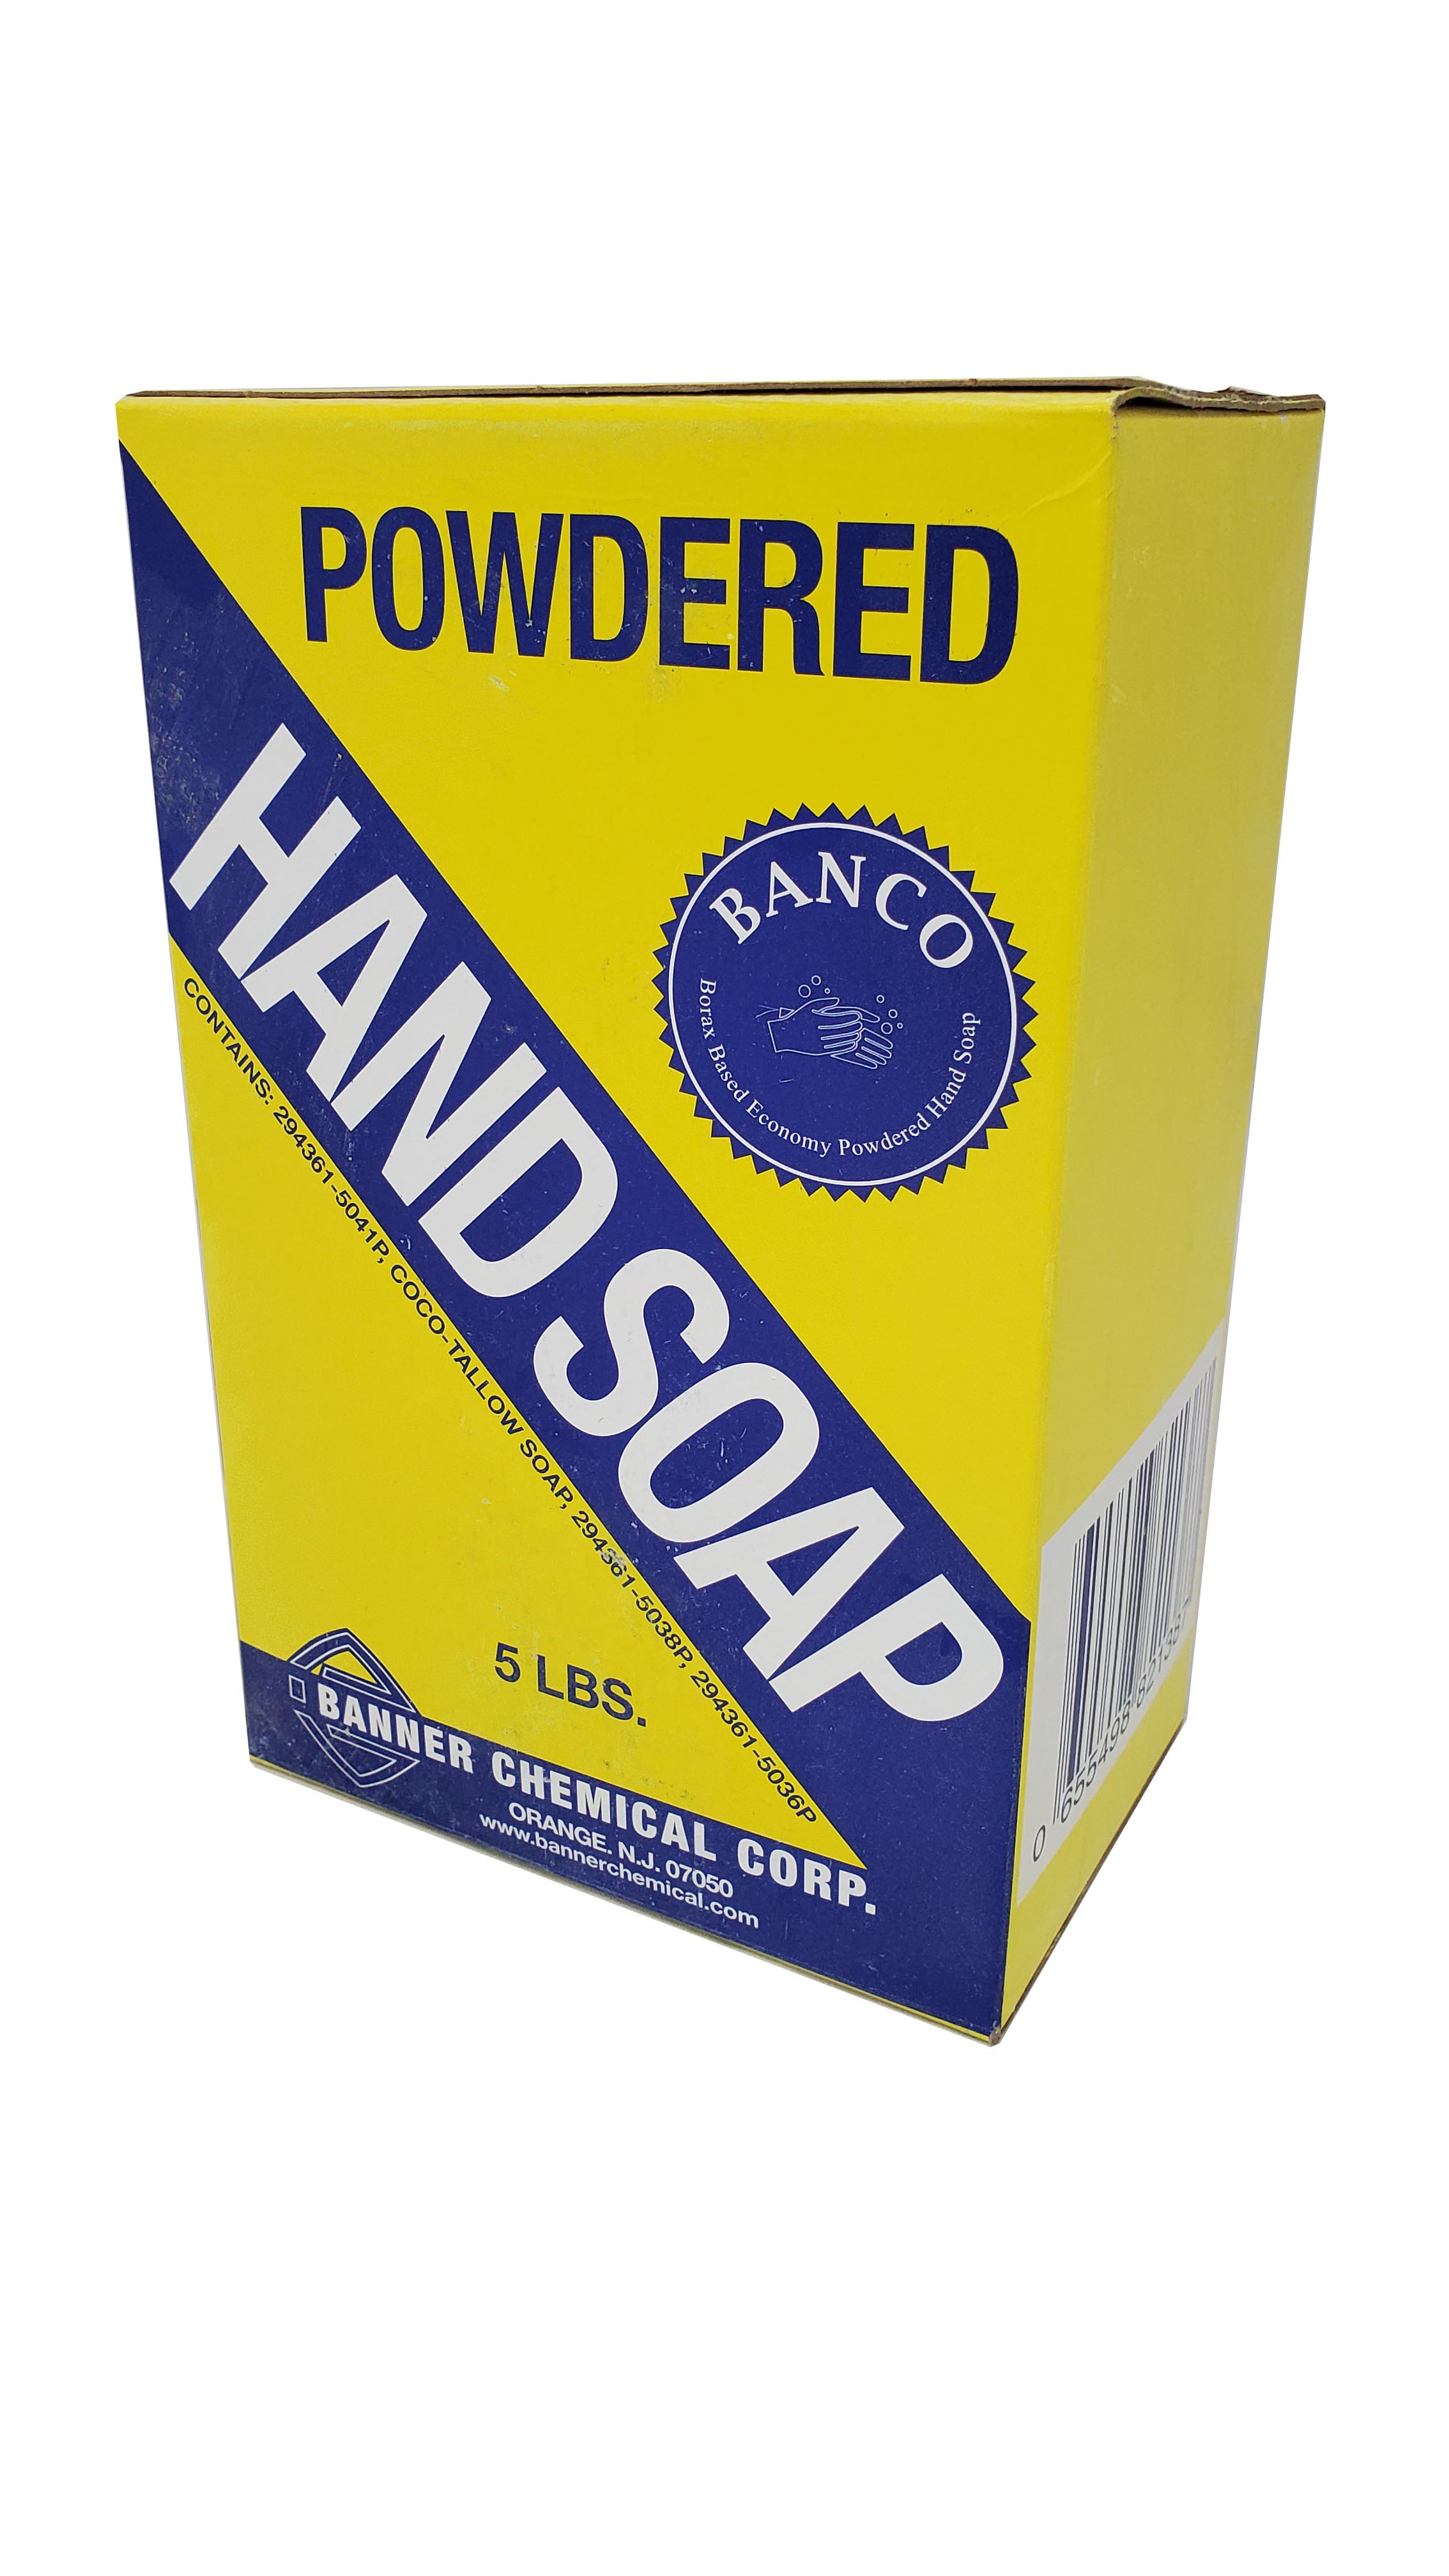 HS301-005 1 Banco Economy Powdered Hand Soap 5 lb. Box for Sale - Buy  online from Star Packaging Supplies for the lowest price. IN STOCK - SHIPS  TODAY